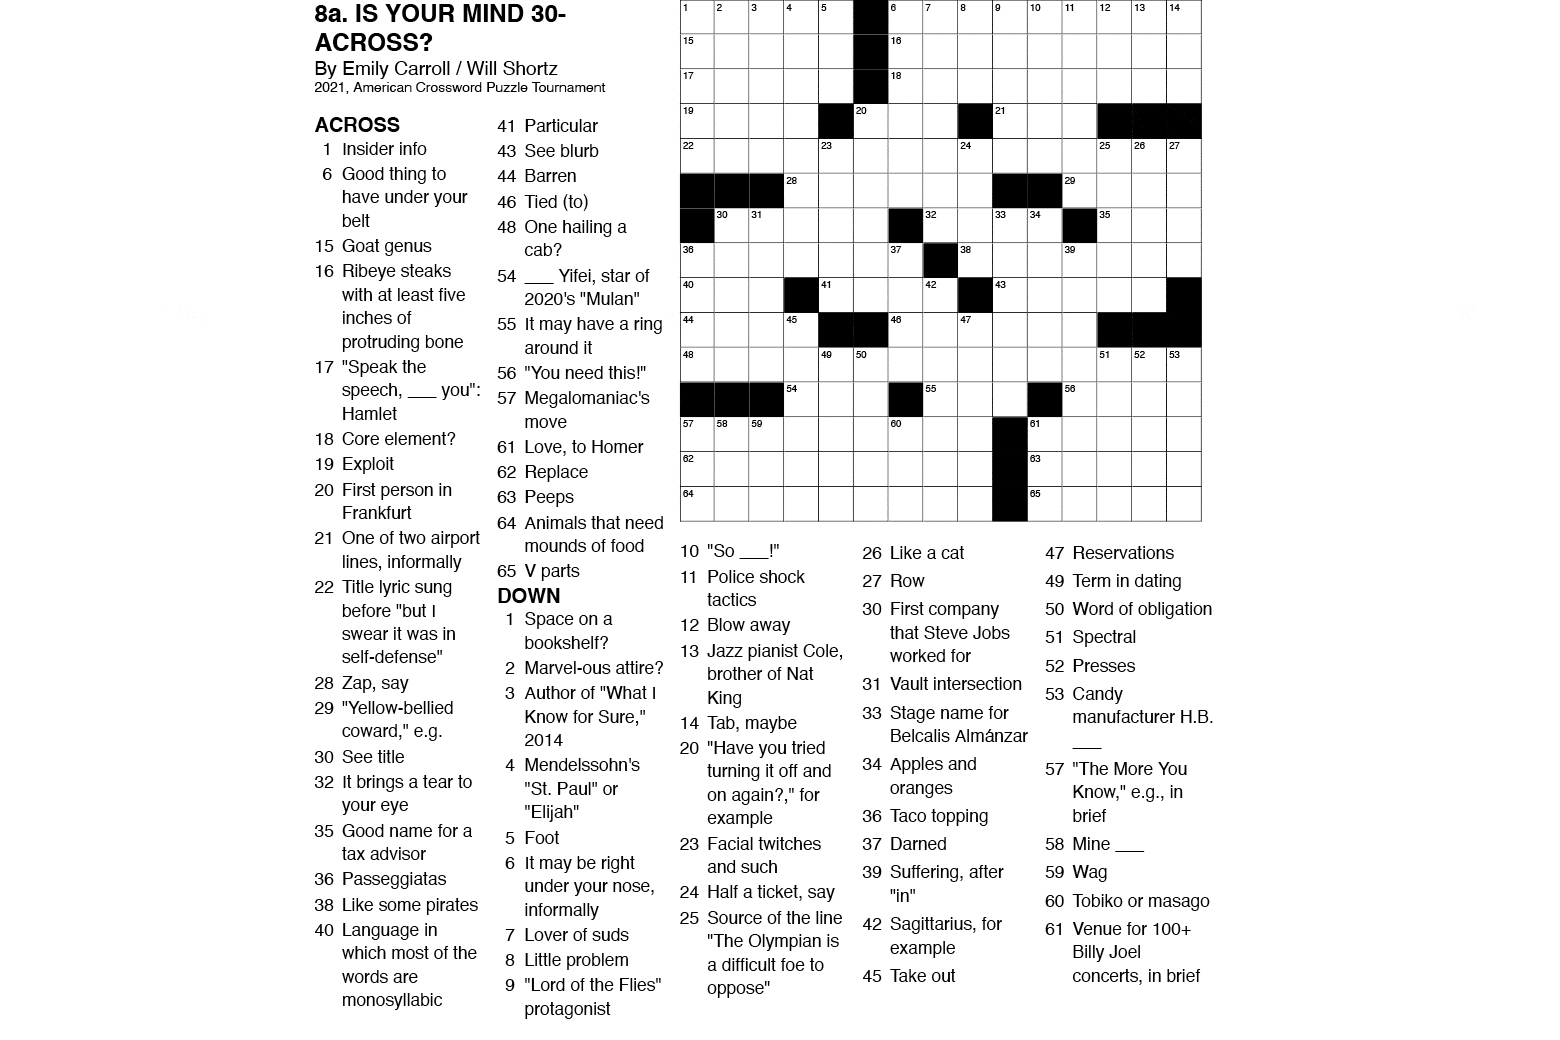 Dr. Fill, an A.I., won the American Crossword Puzzle Tournament. Here’s